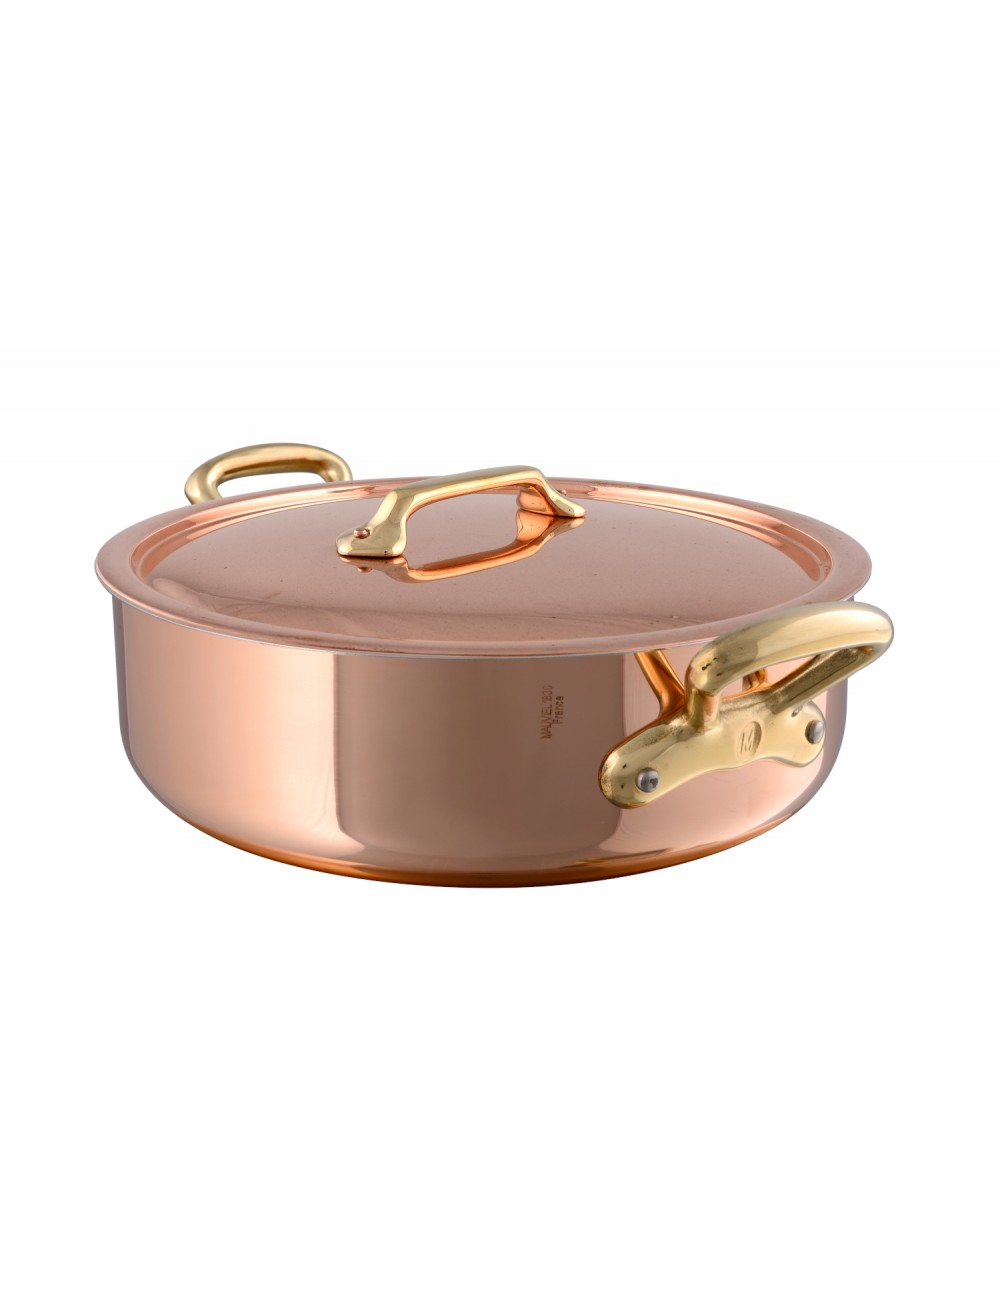 SAUTE PAN IN COPPER S/STEEL M200 WITH LID